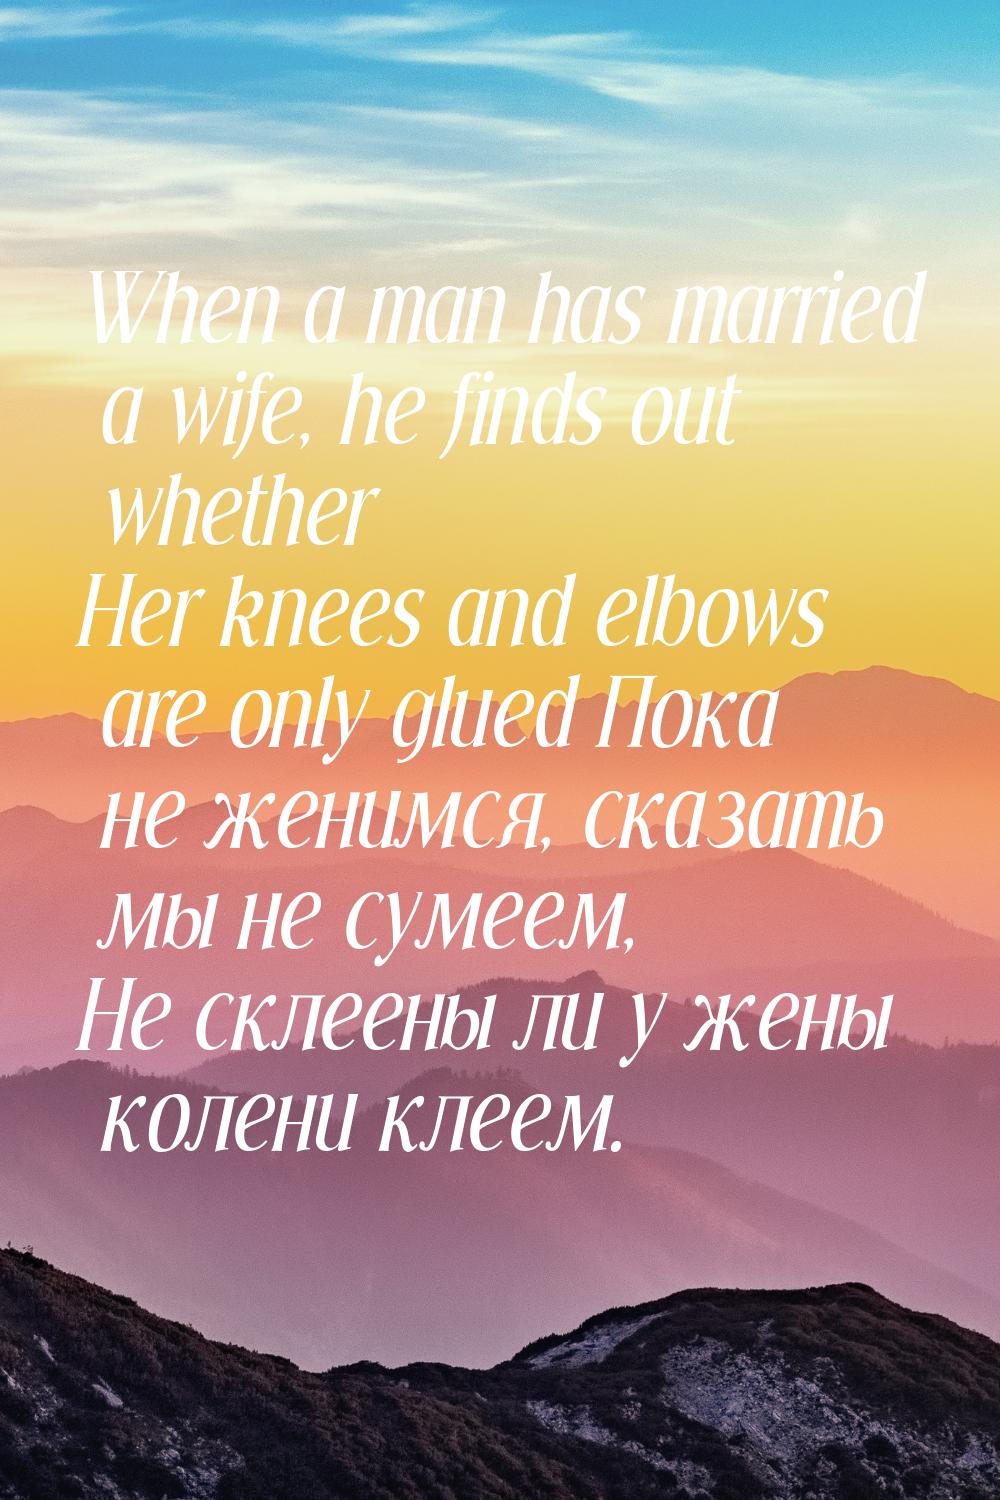 When a man has married a wife, he finds out whether Her knees and elbows are only glued По